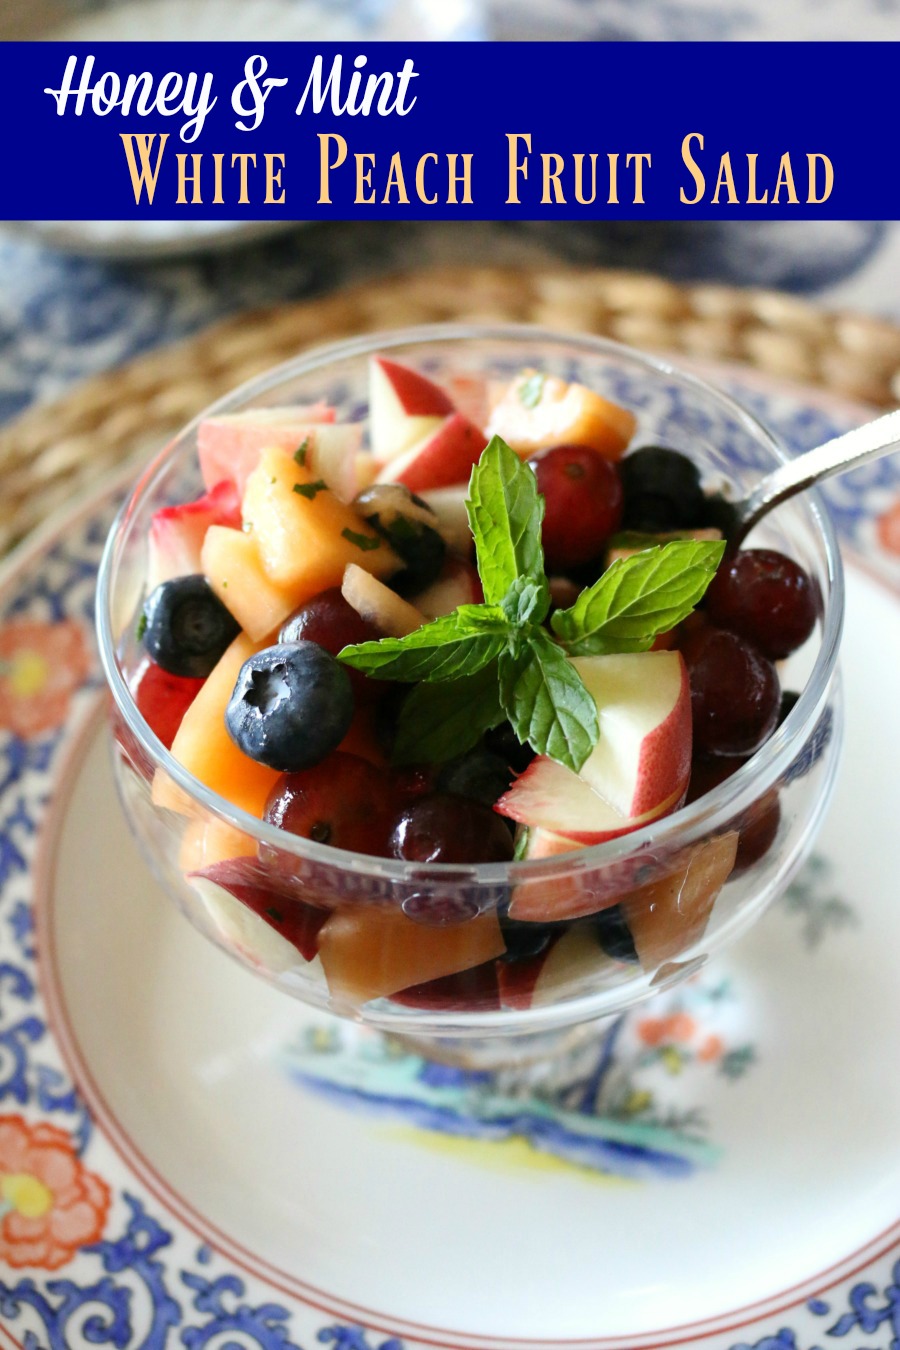 Honey and Mint White Peach Fruit Salad - perfectly delicious!